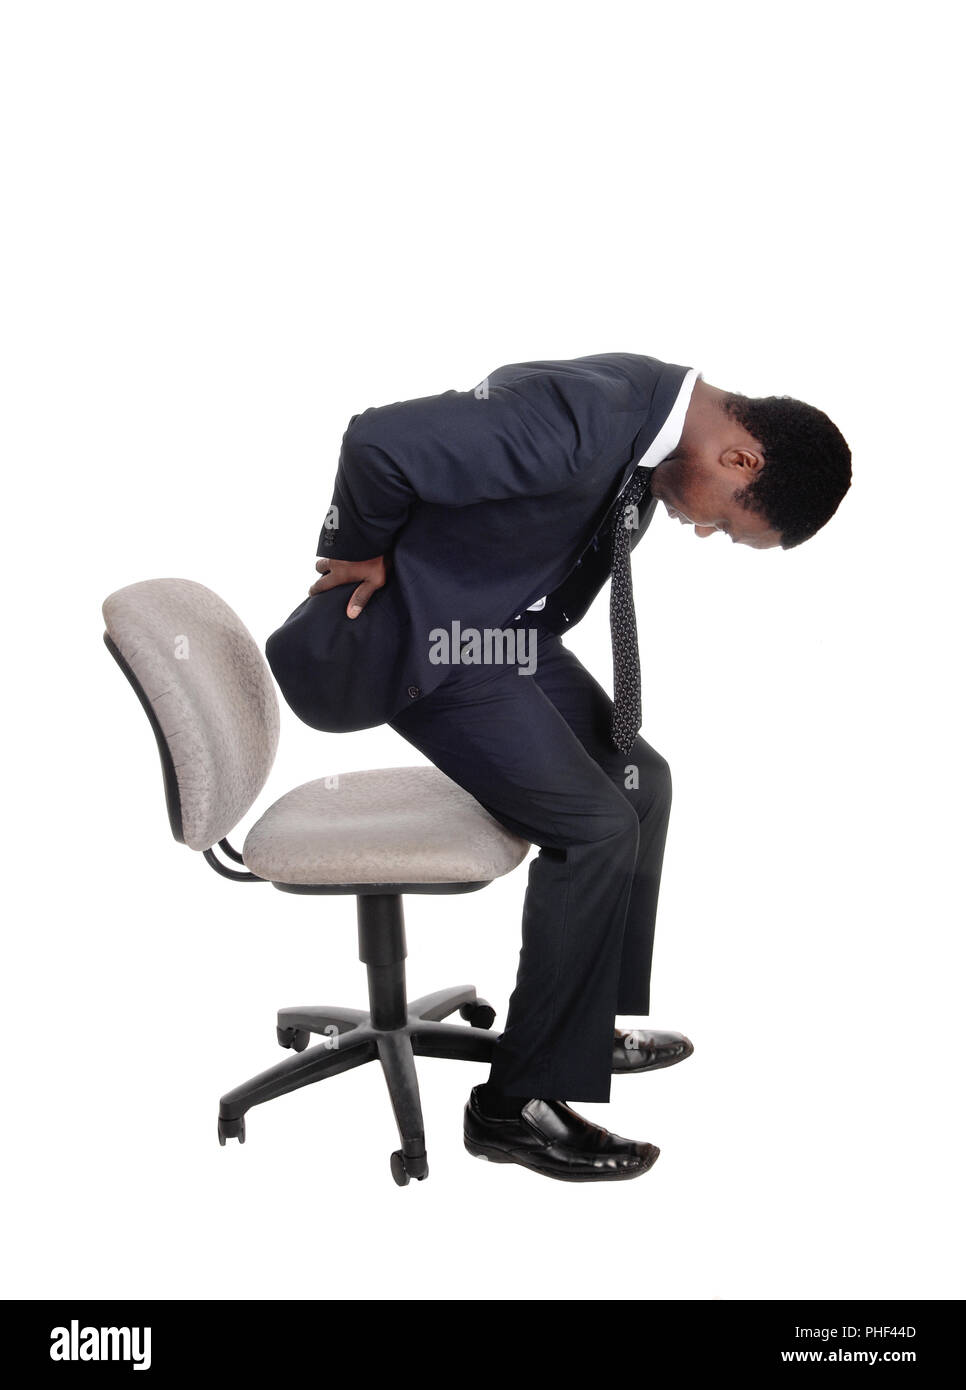 Man with back pain getting up from chair Stock Photo